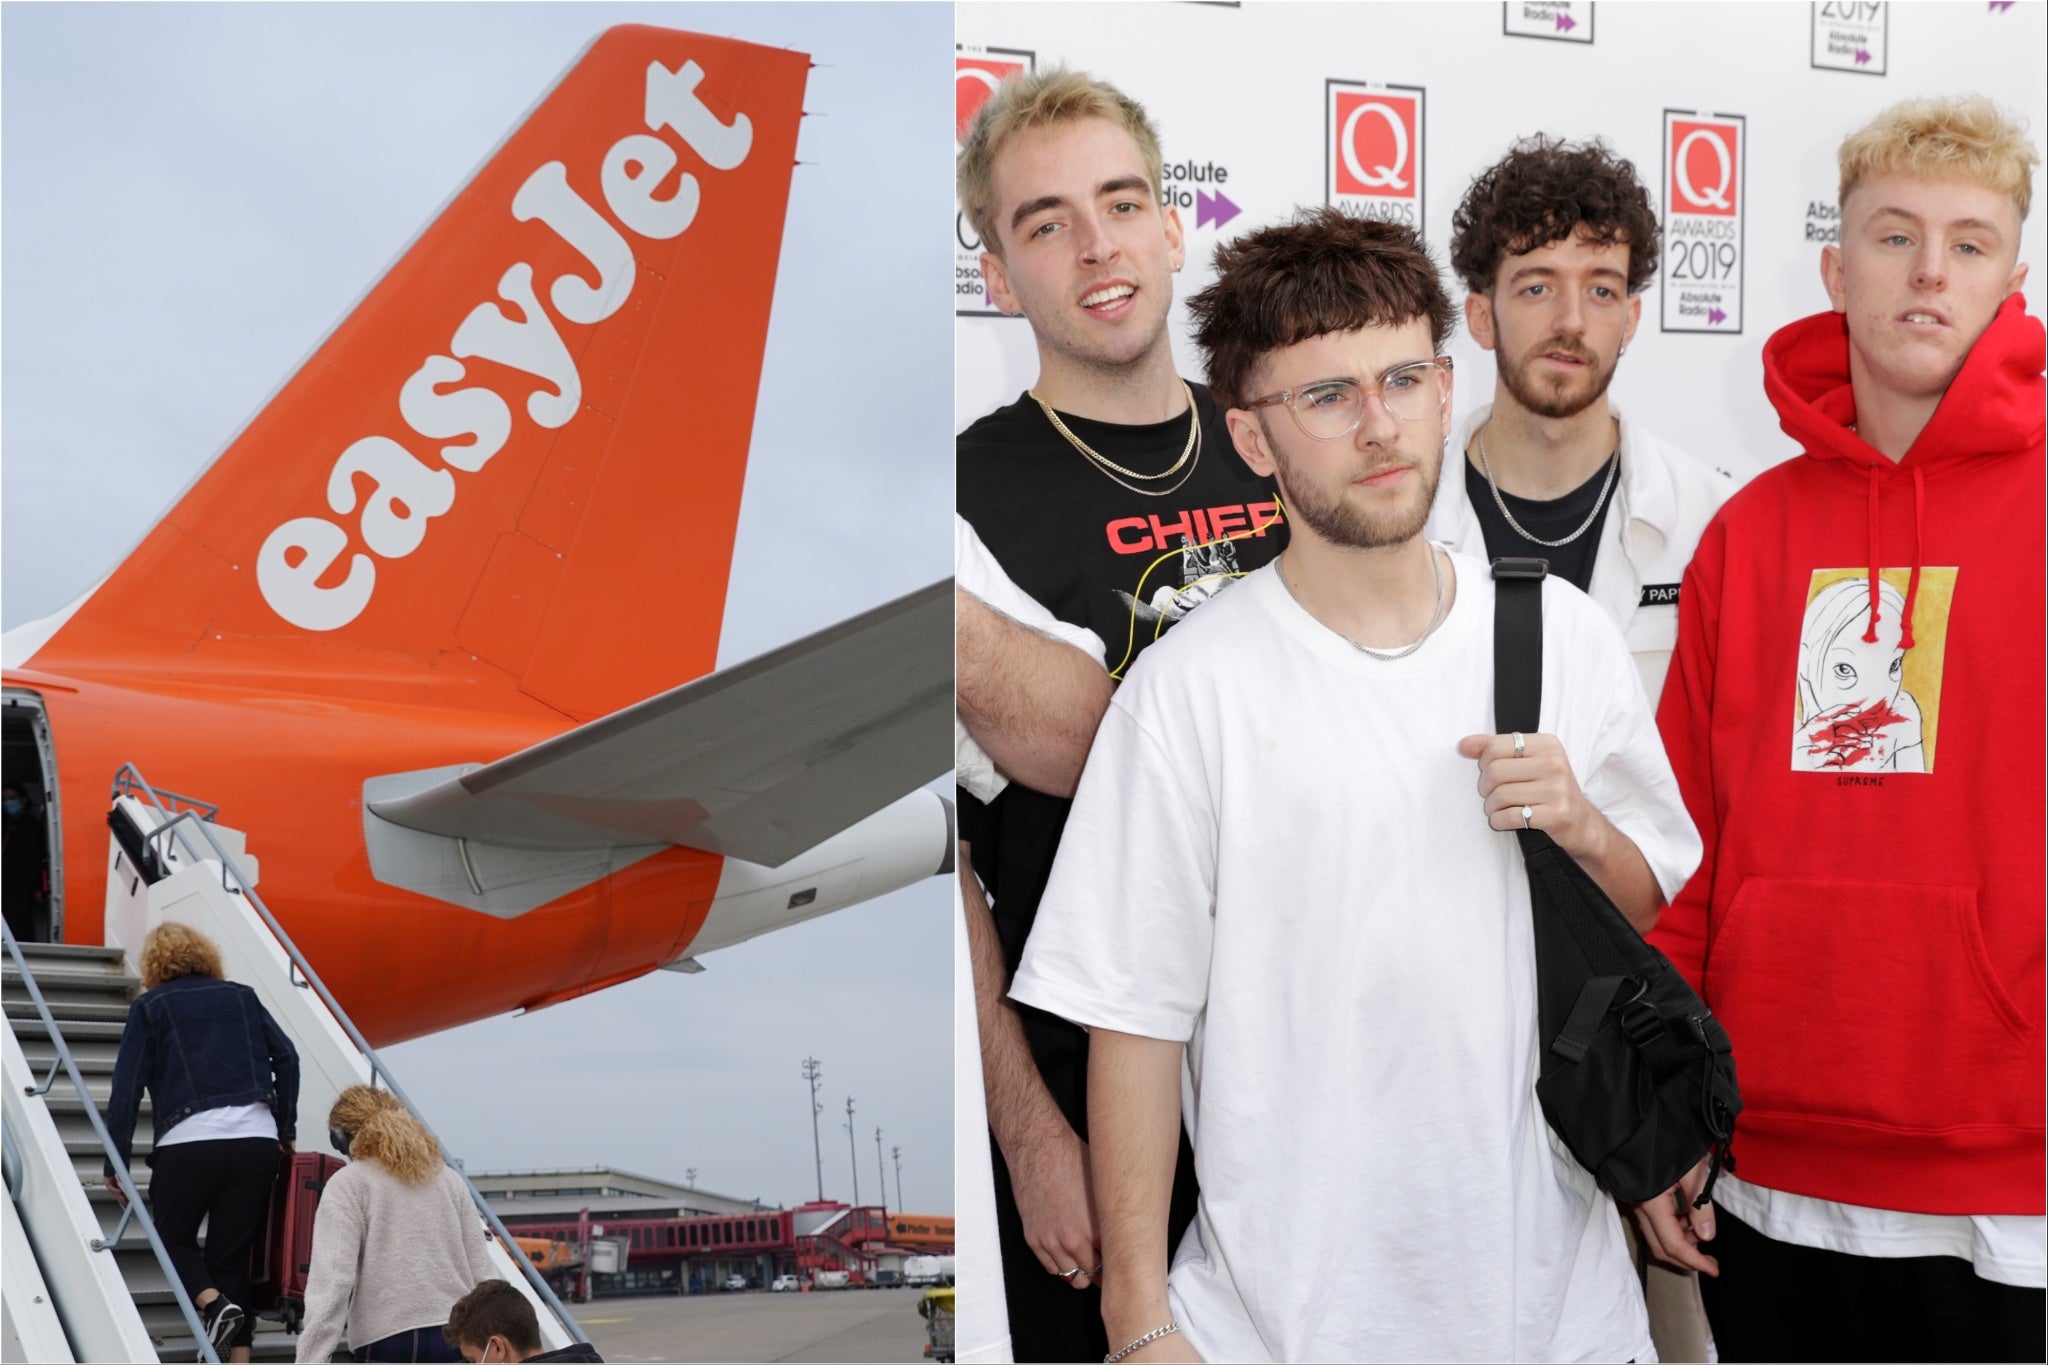 easyJet’s owners, easyGroup, forced the Leicester band to change their name in 2023